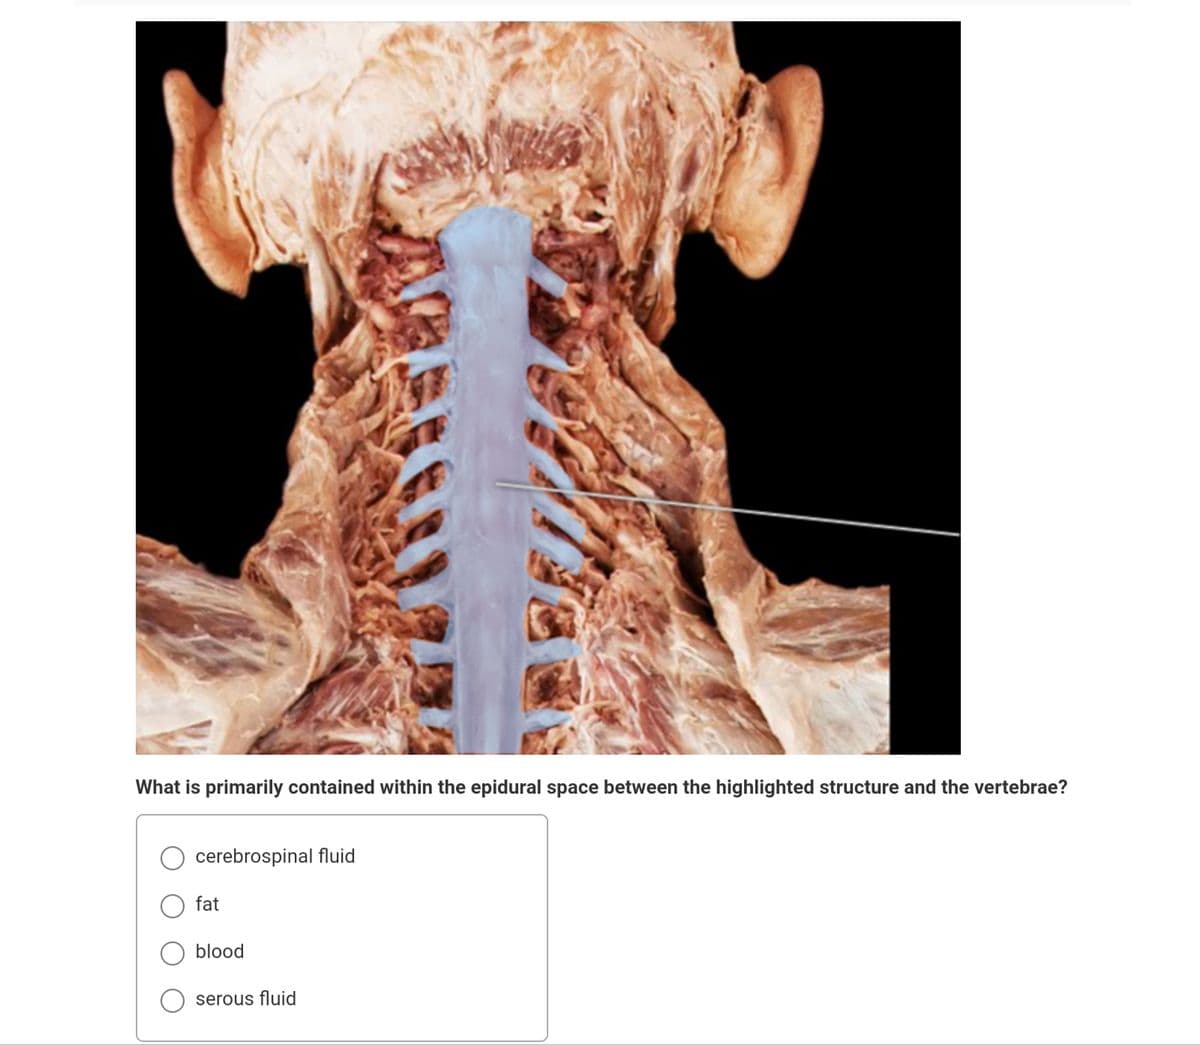 What is primarily contained within the epidural space between the highlighted structure and the vertebrae?
cerebrospinal fluid
fat
blood
serous fluid